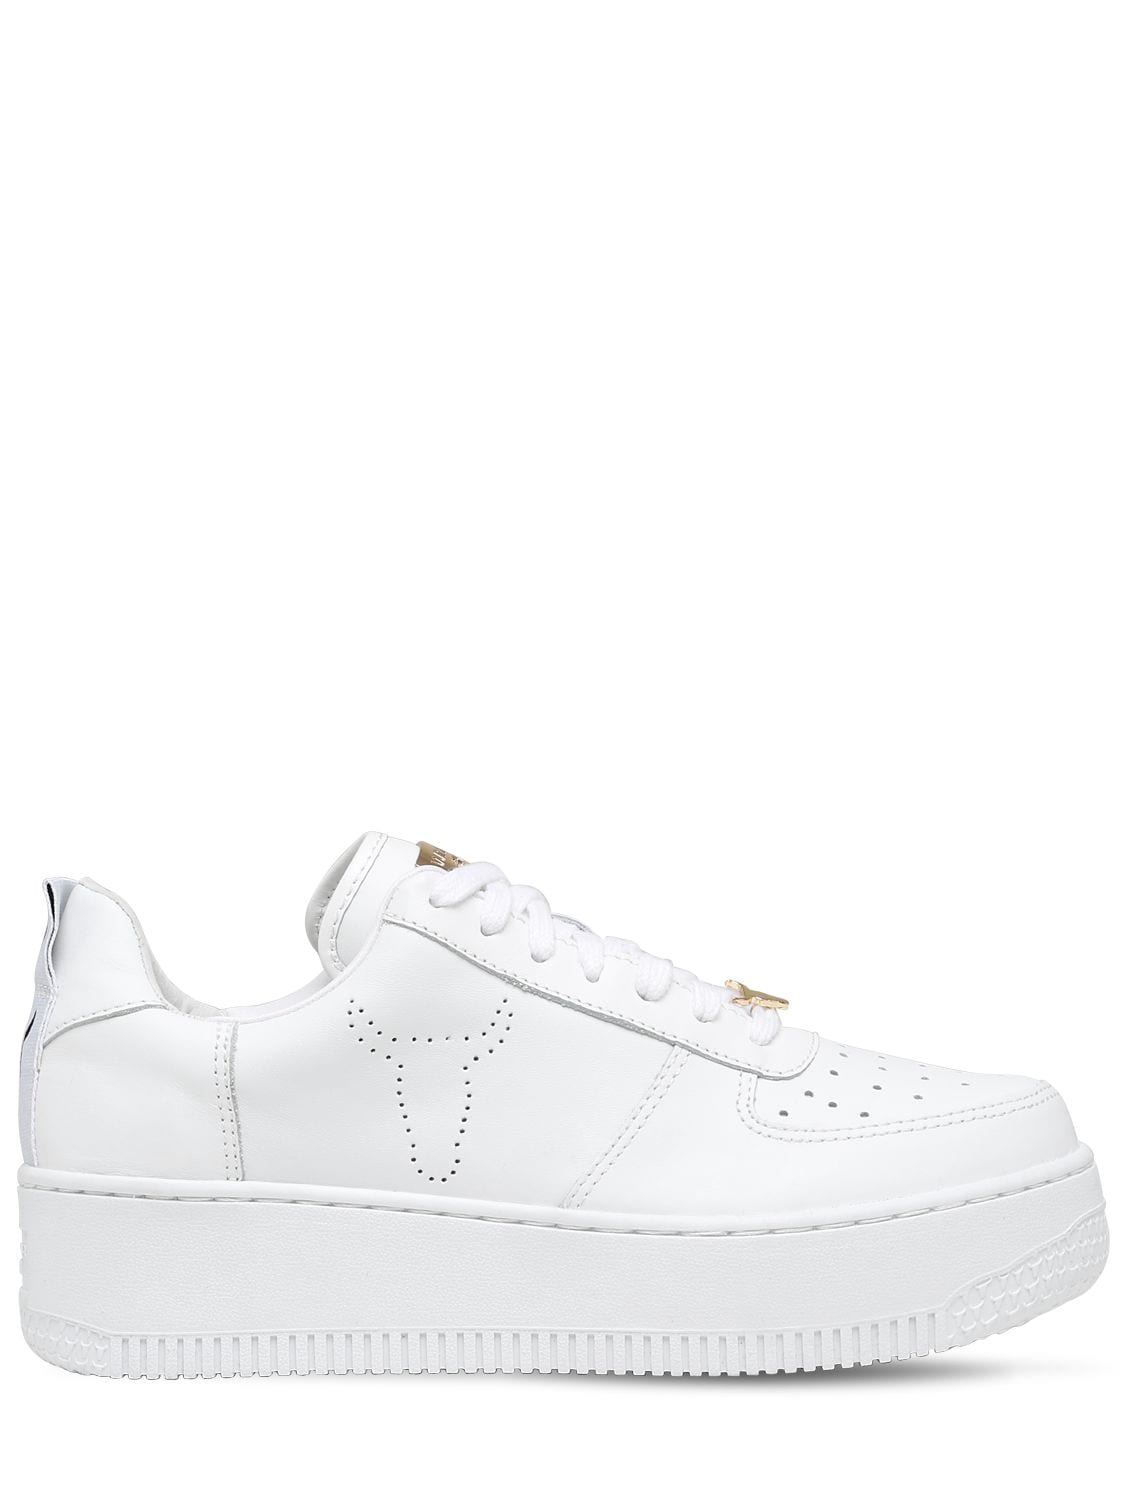 Windsor Smith 50mm Racer Leather Sneakers In White